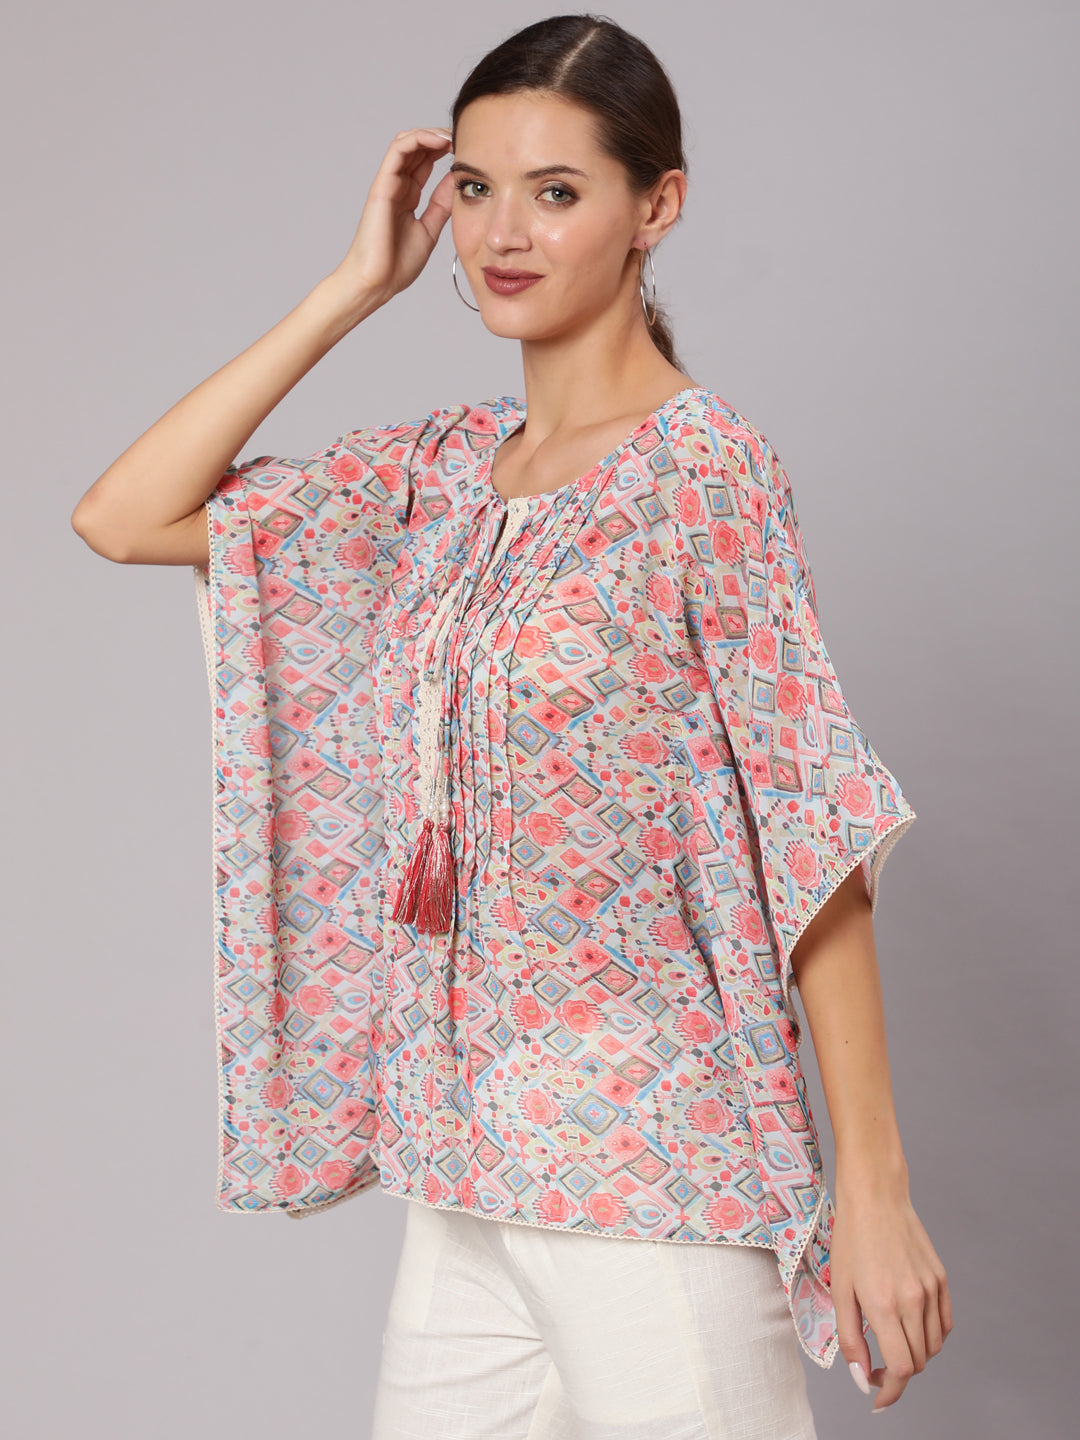 Peach Geometric Printed Georgette Kaftan Top With Pintucks And Lace Details At The Yoke for women online at Jaipur Kurti